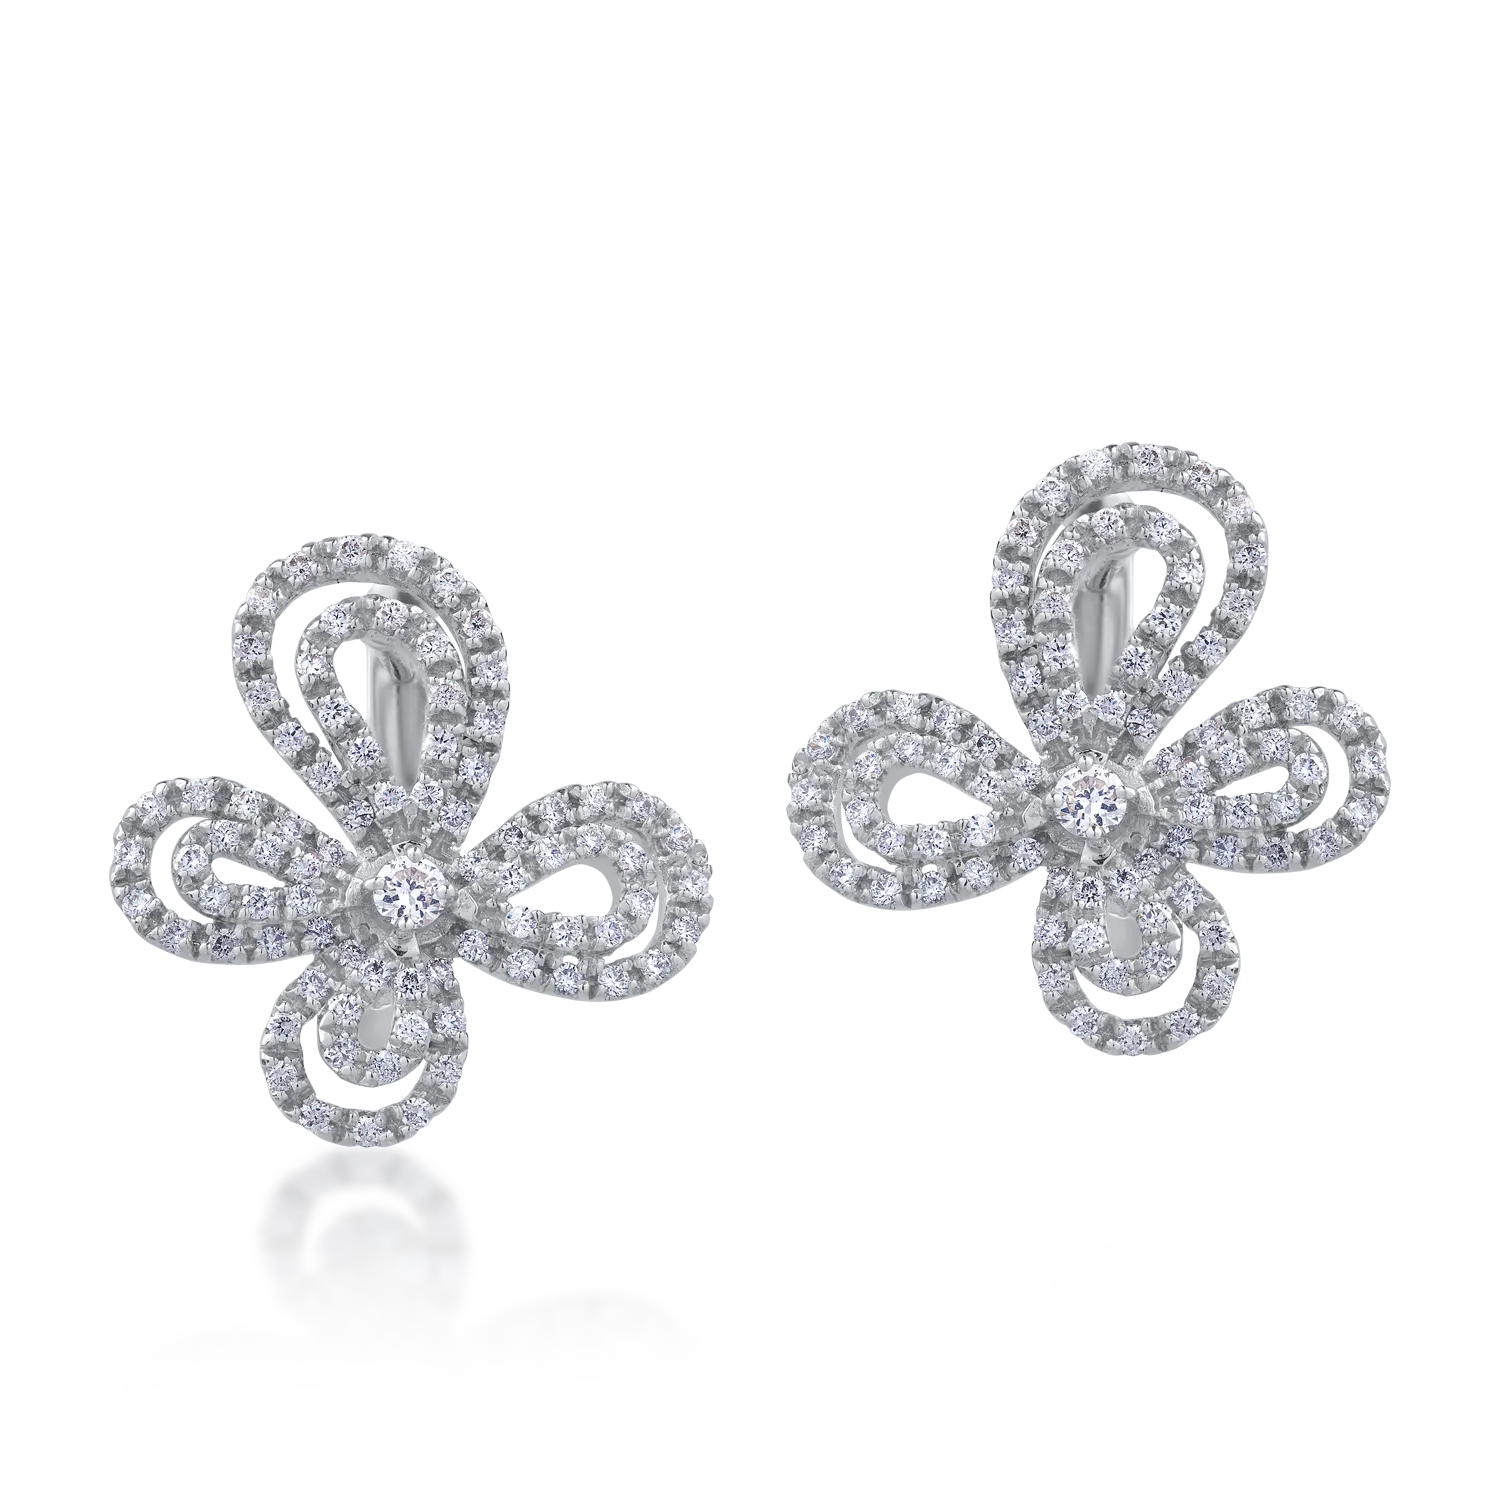 18K white gold earrings with 1.212ct diamonds